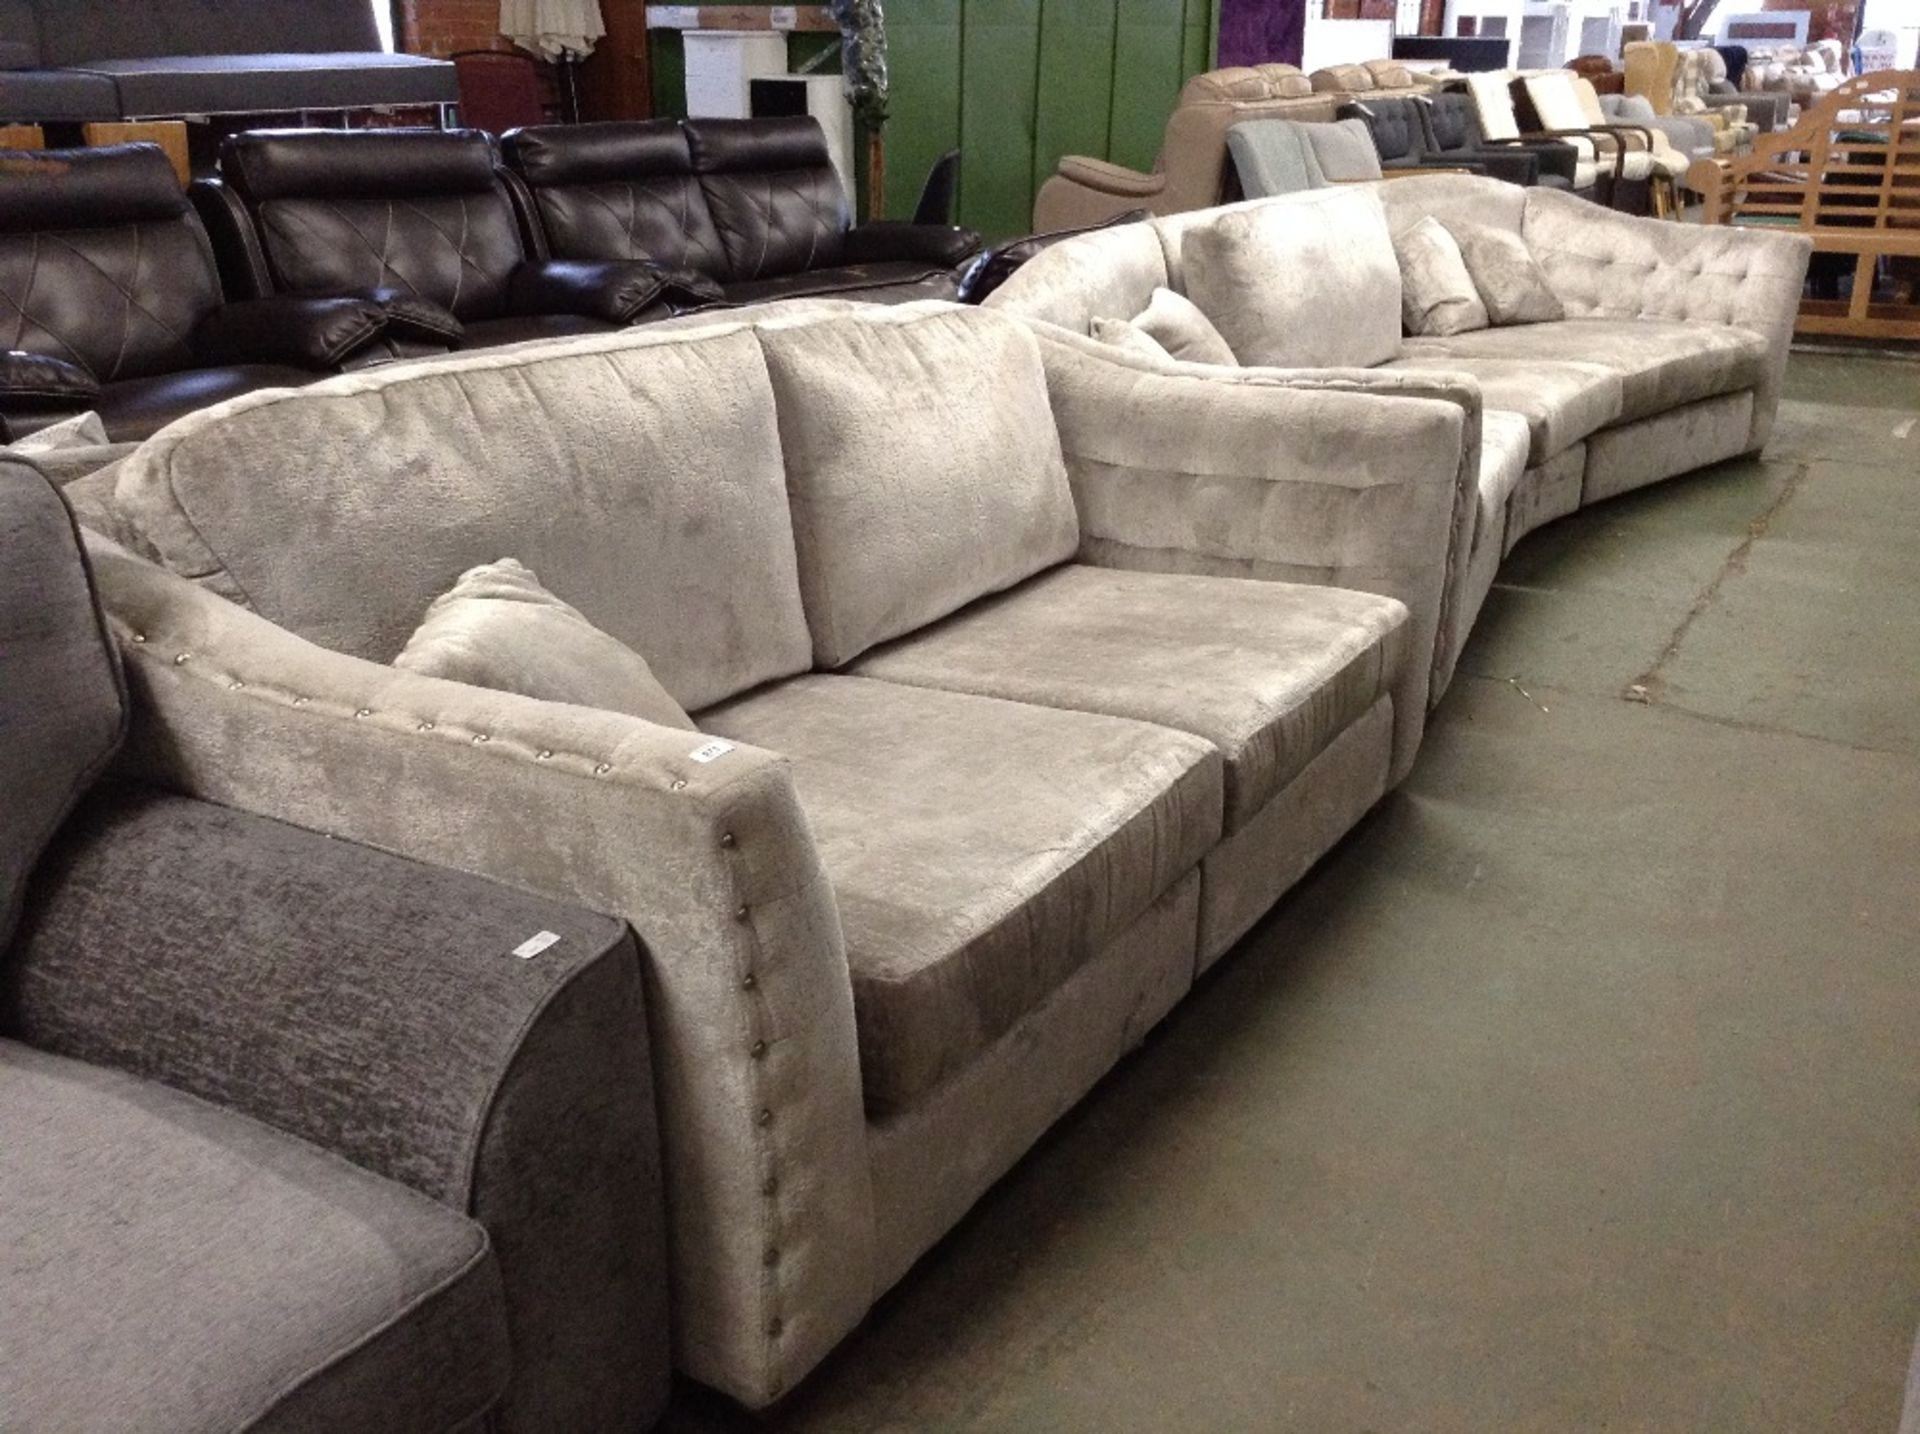 GREY FABRIC 4 SEATER WEDGE AND 3 SEATER SOFA (DIRT